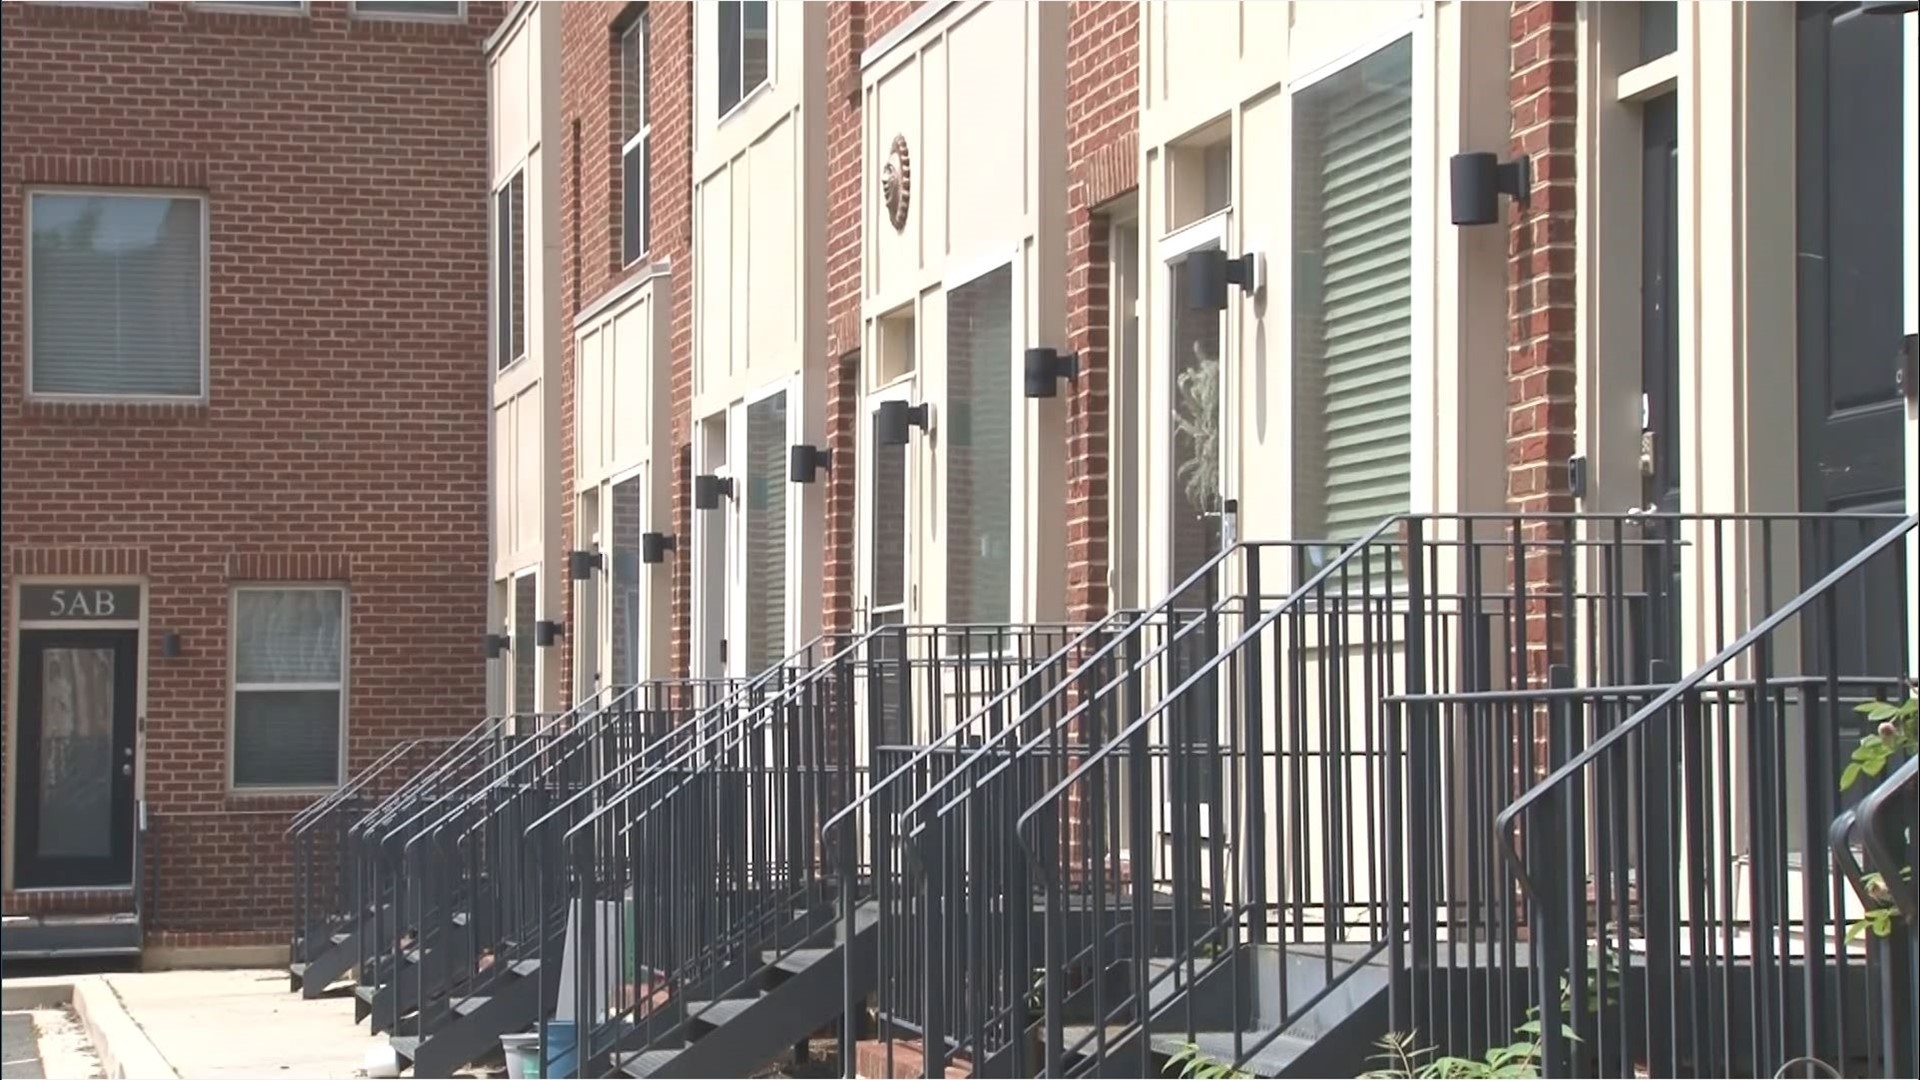 Residents at 1262 Talbert Street had to leave their homes more than two years ago after it was determined their housing complex was slipping off its foundation.